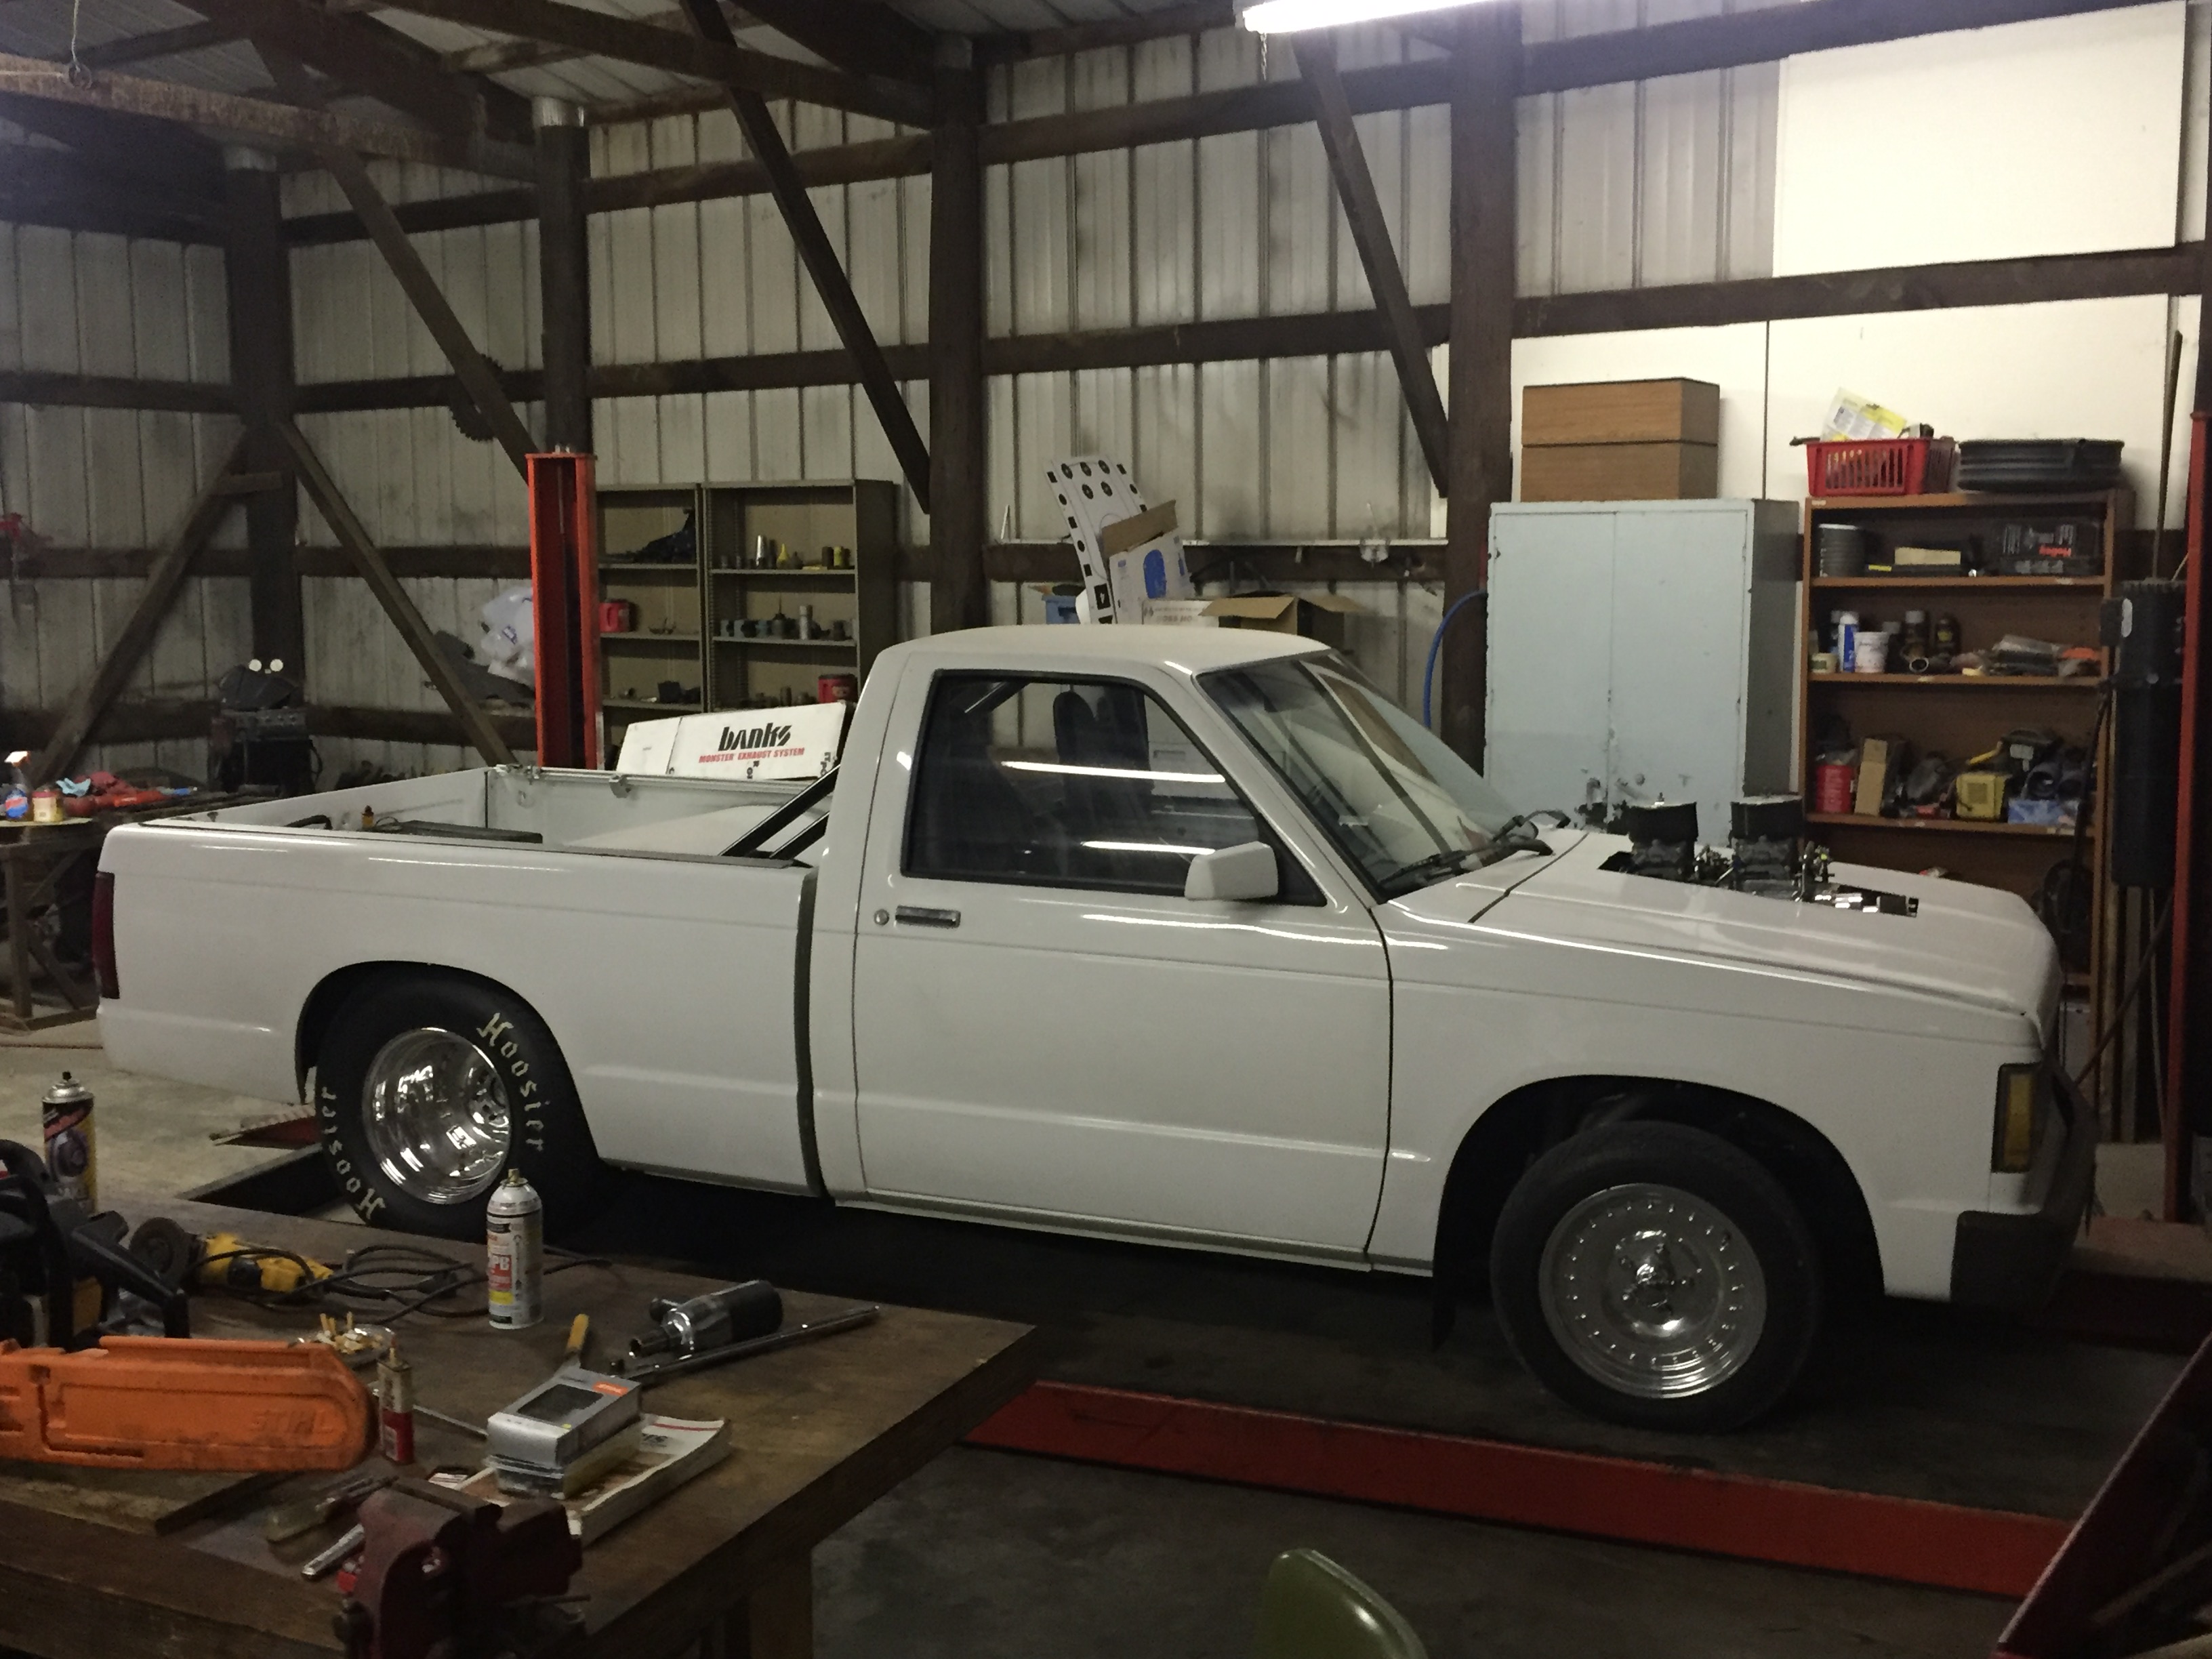 1998 Chevy S-10 Dent Repair, Springfield, IL. http://217dent.com